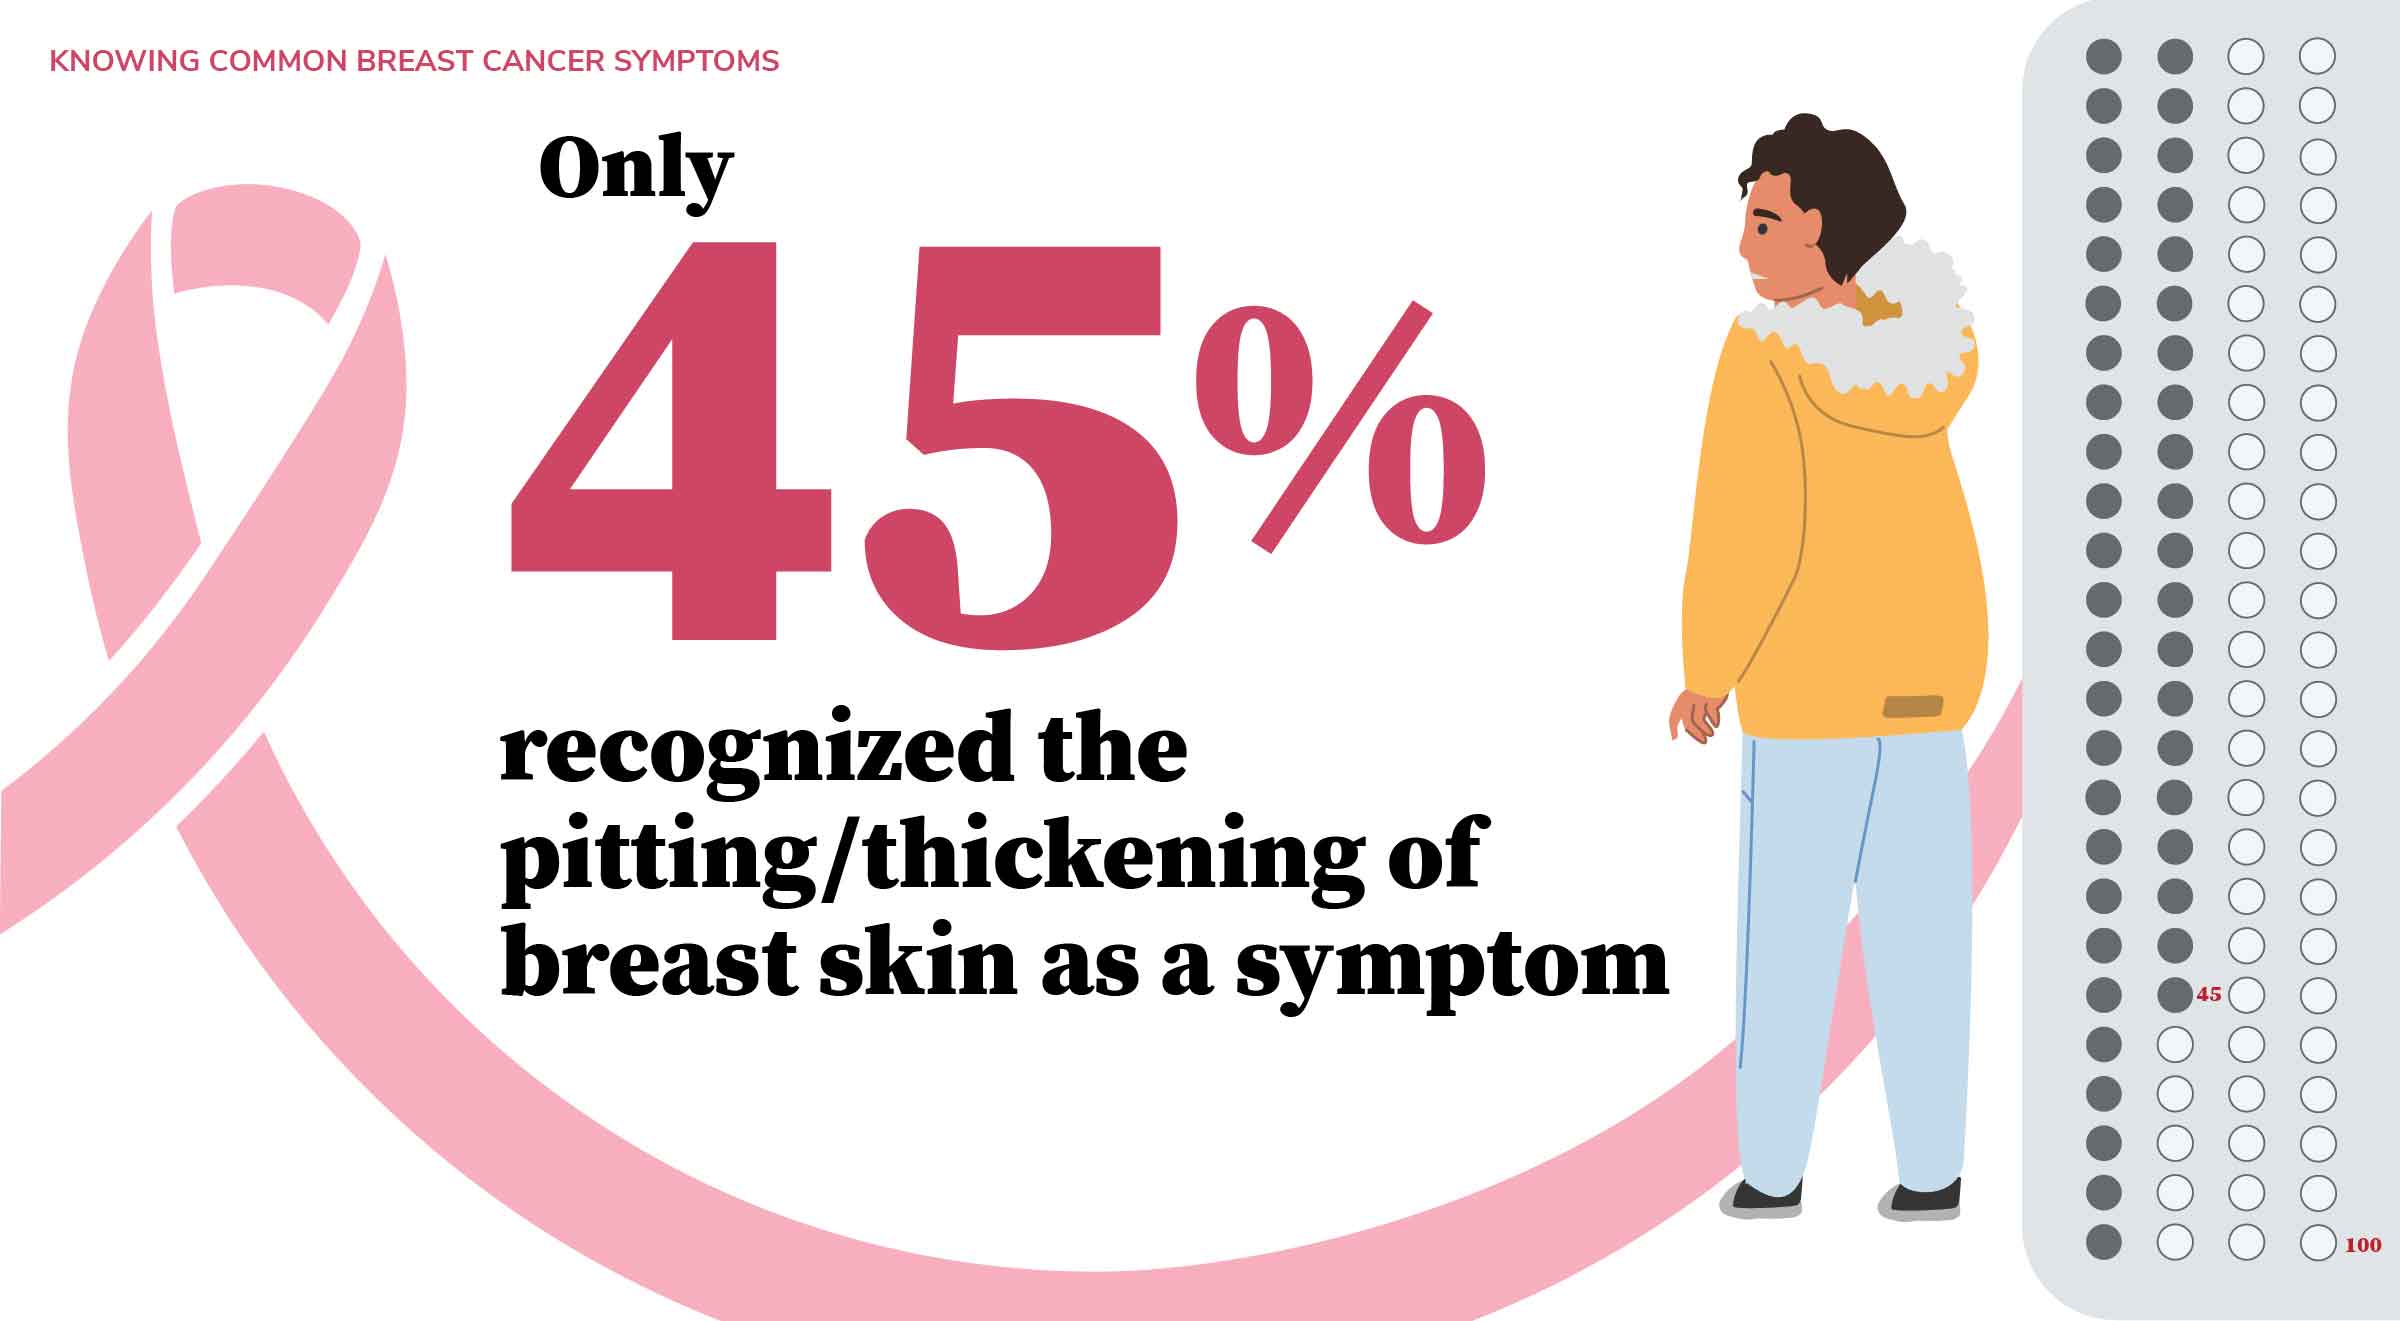 Seven little-known breast cancer symptoms – and how to reduce your